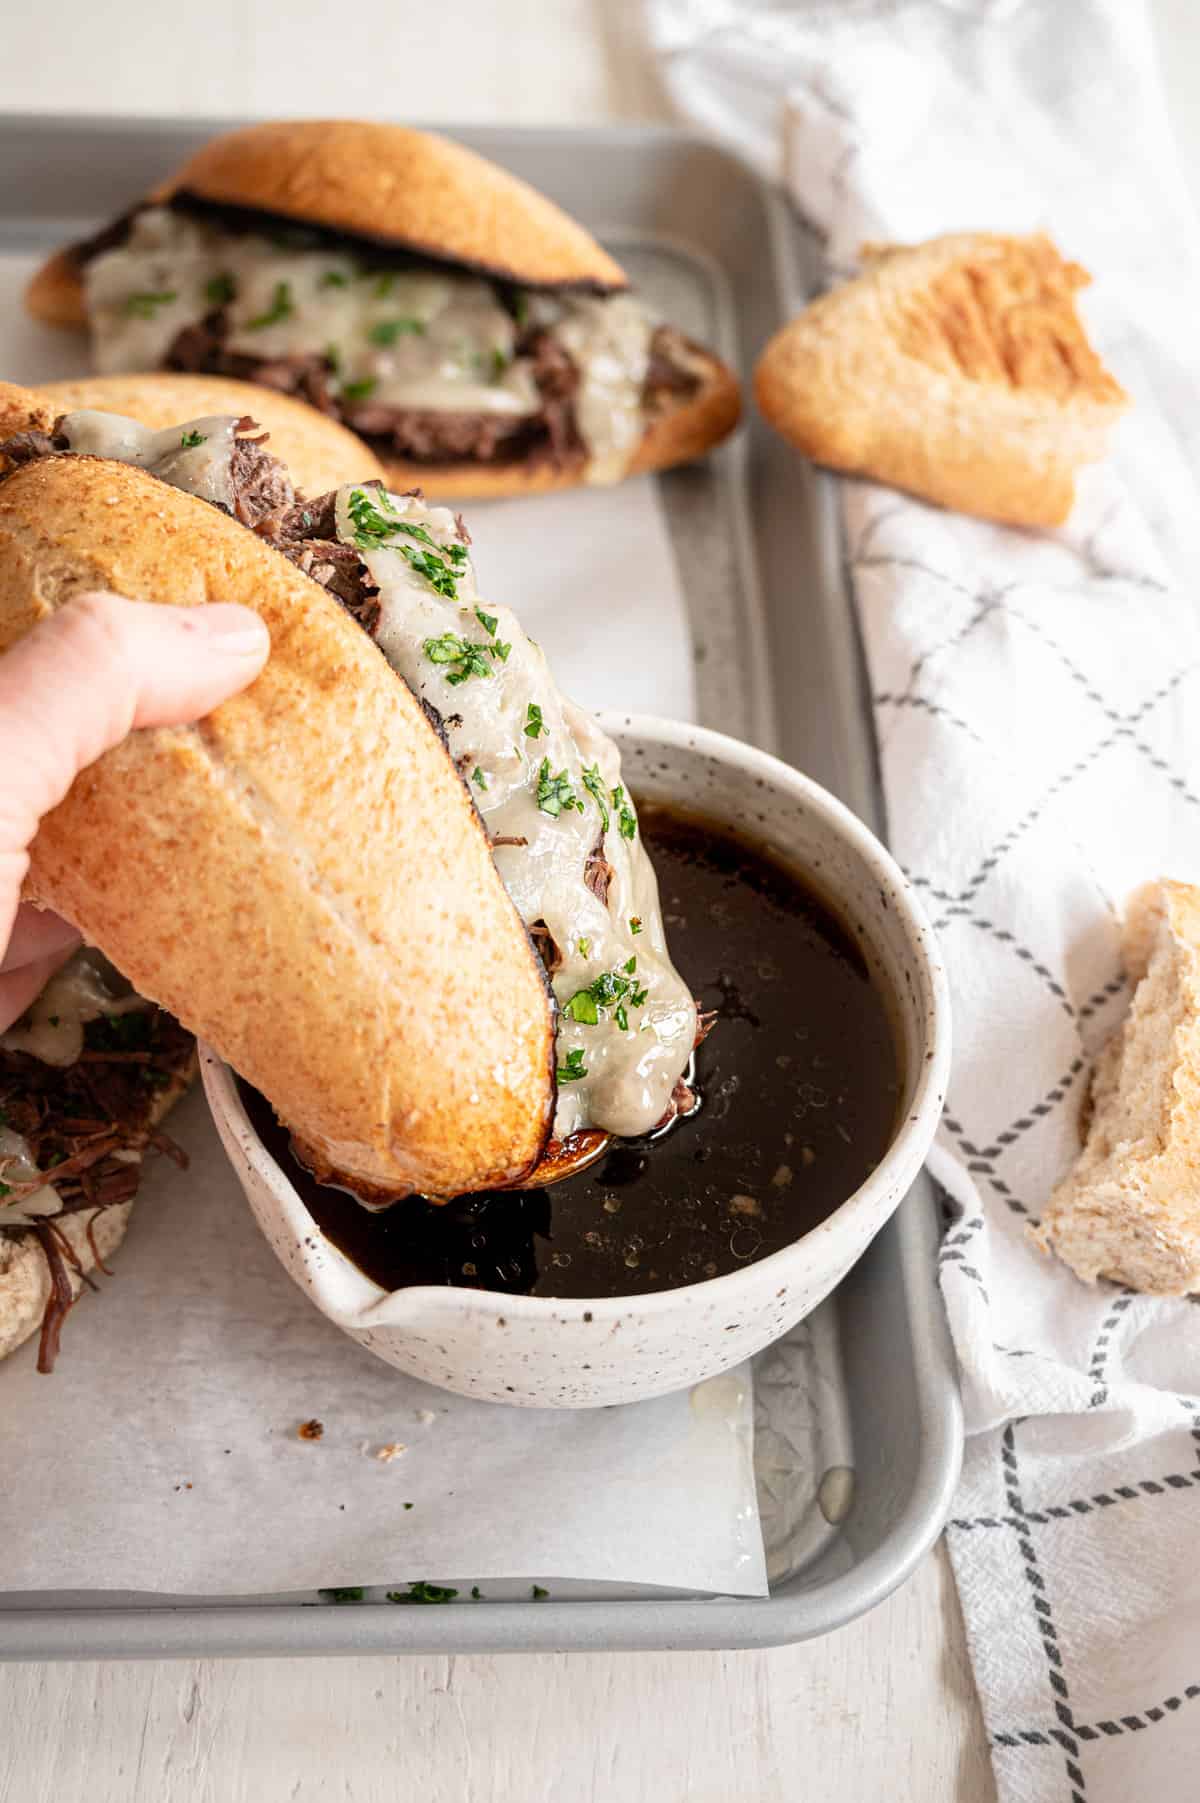 French Dip sandwich dipped in au jus sauce.